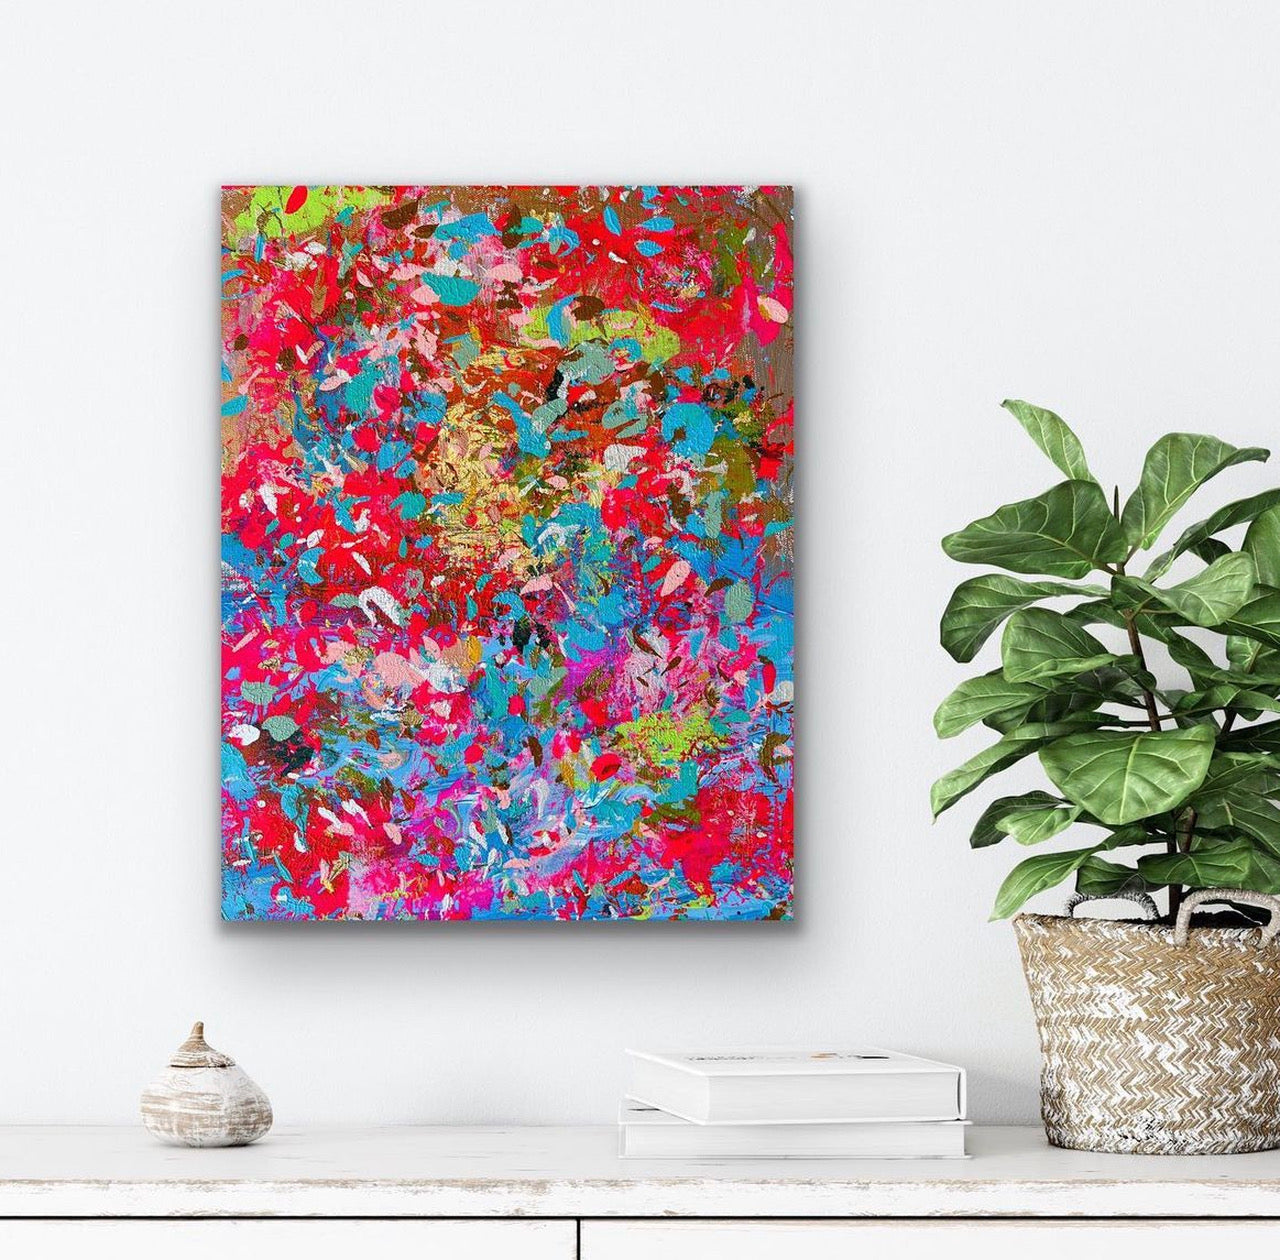 "The Rising" Original Painting on Canvas